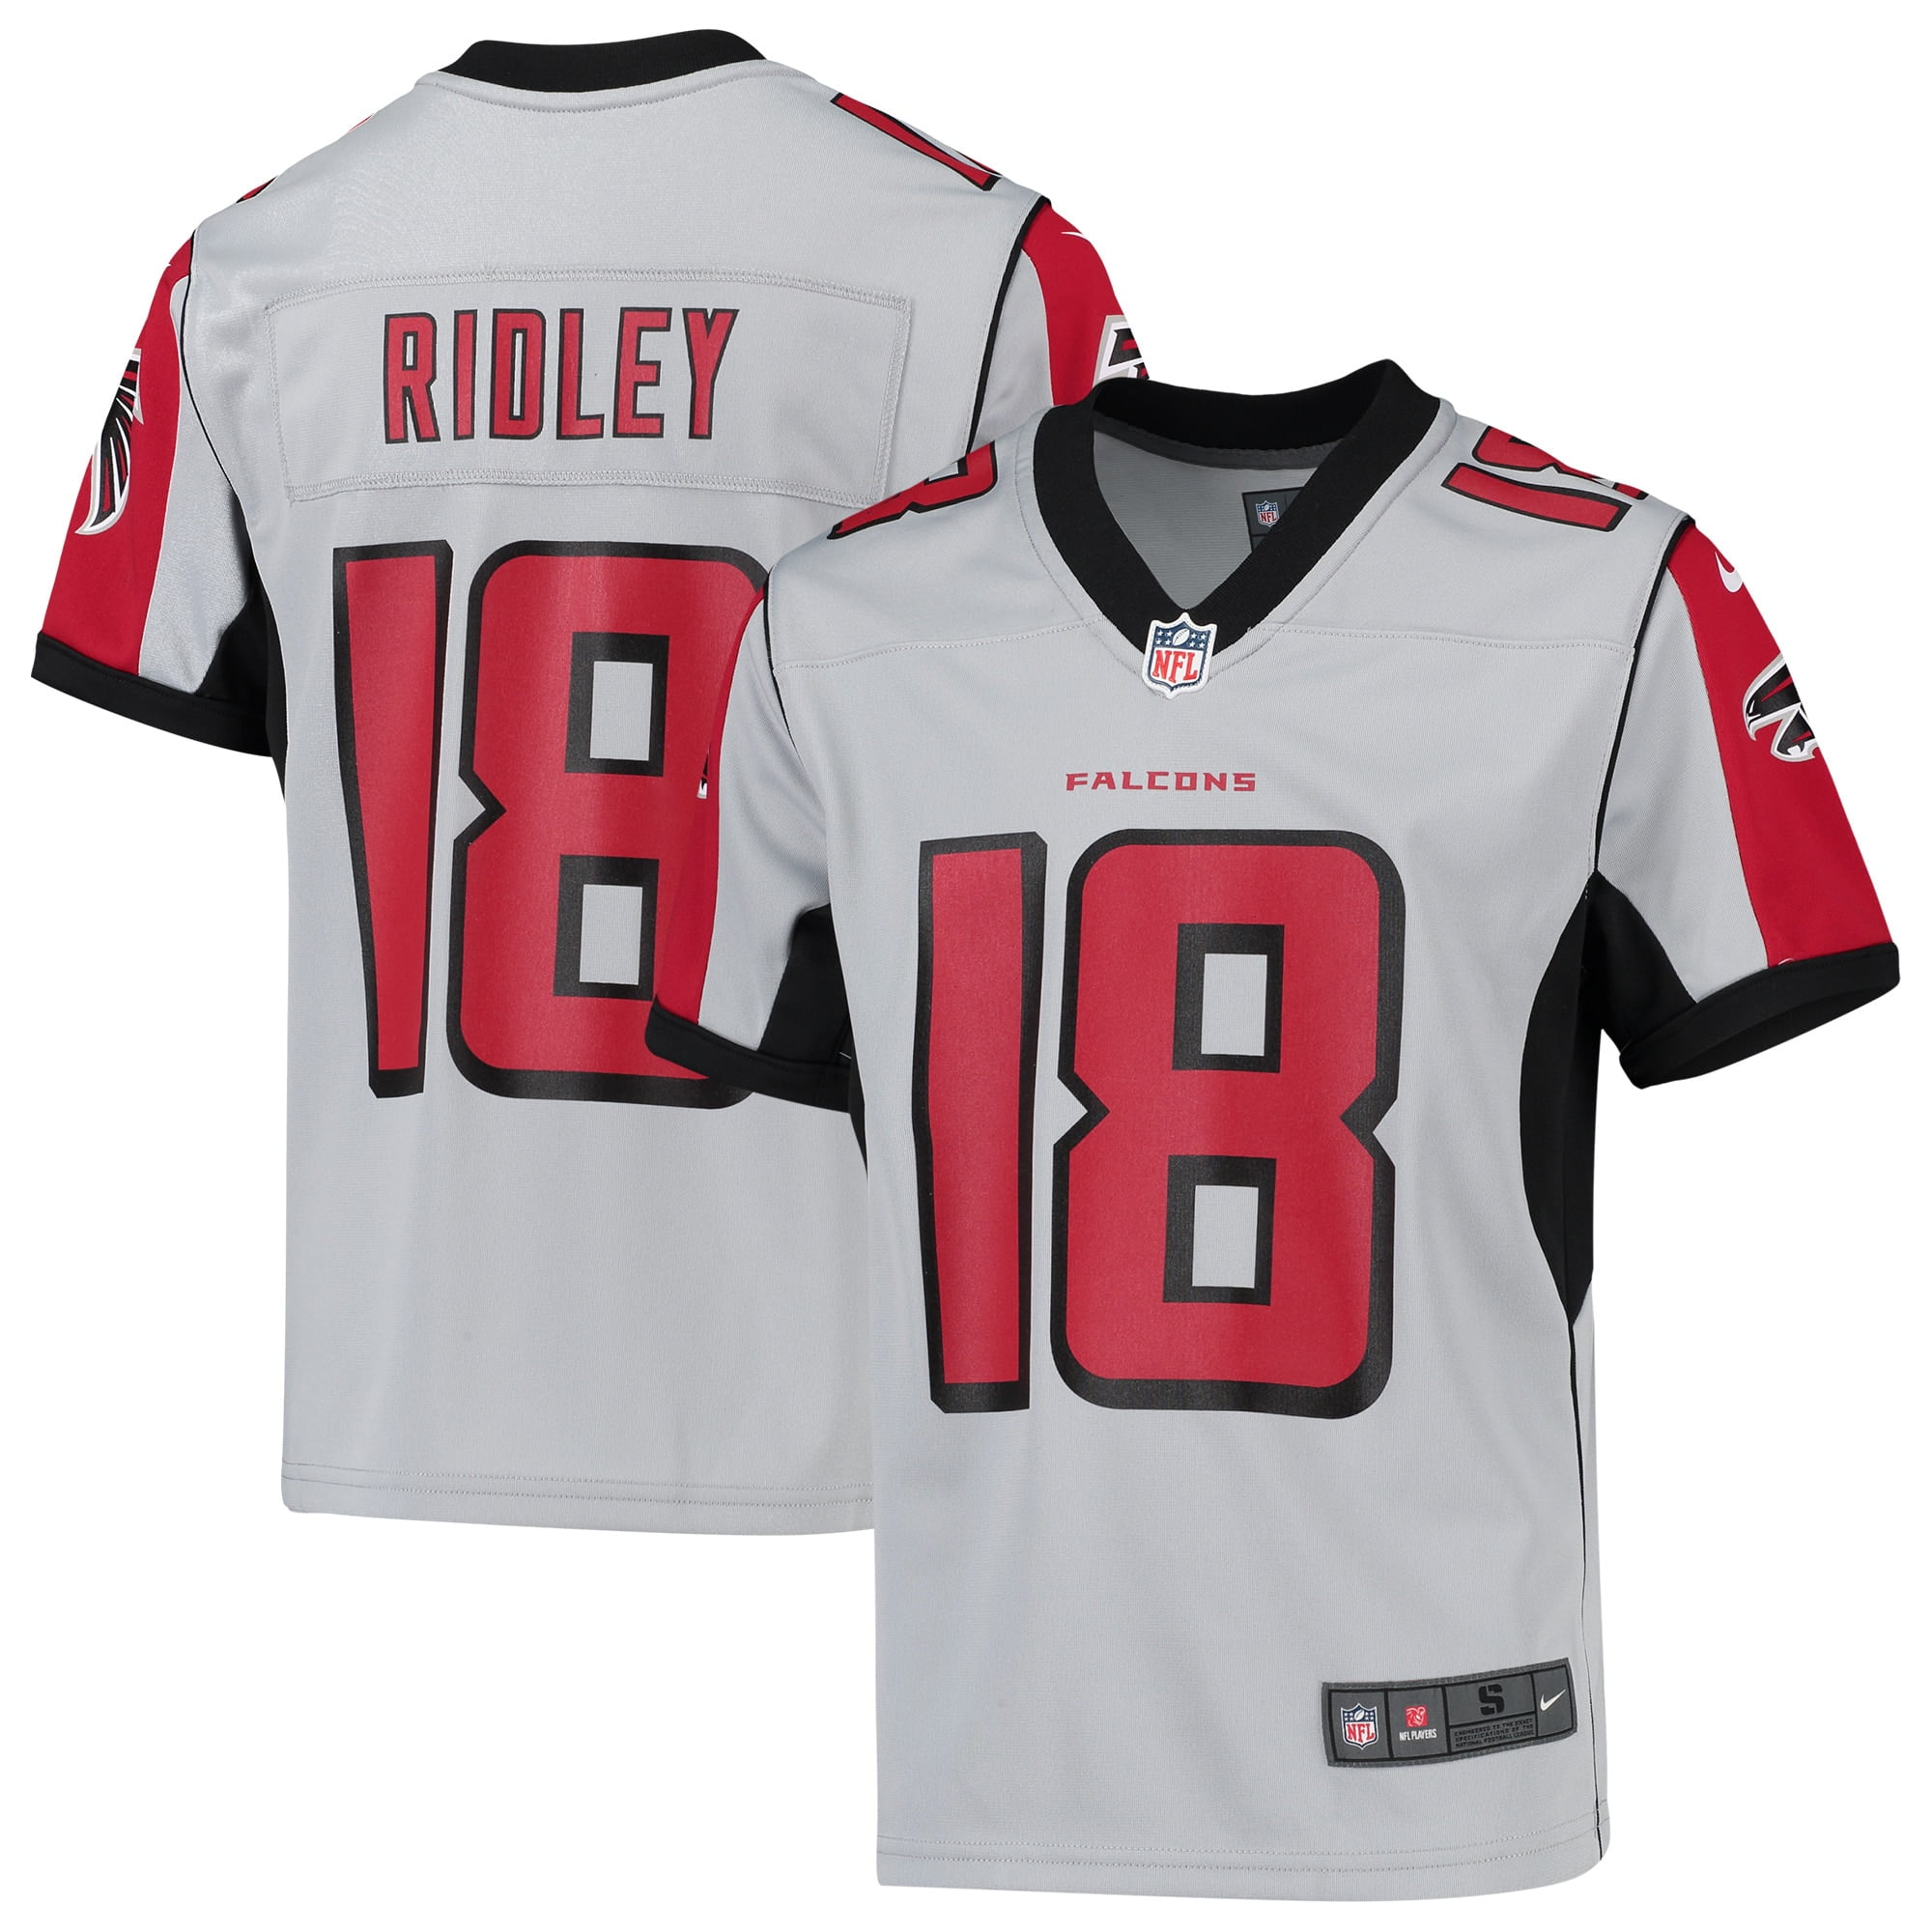 falcons ridley jersey